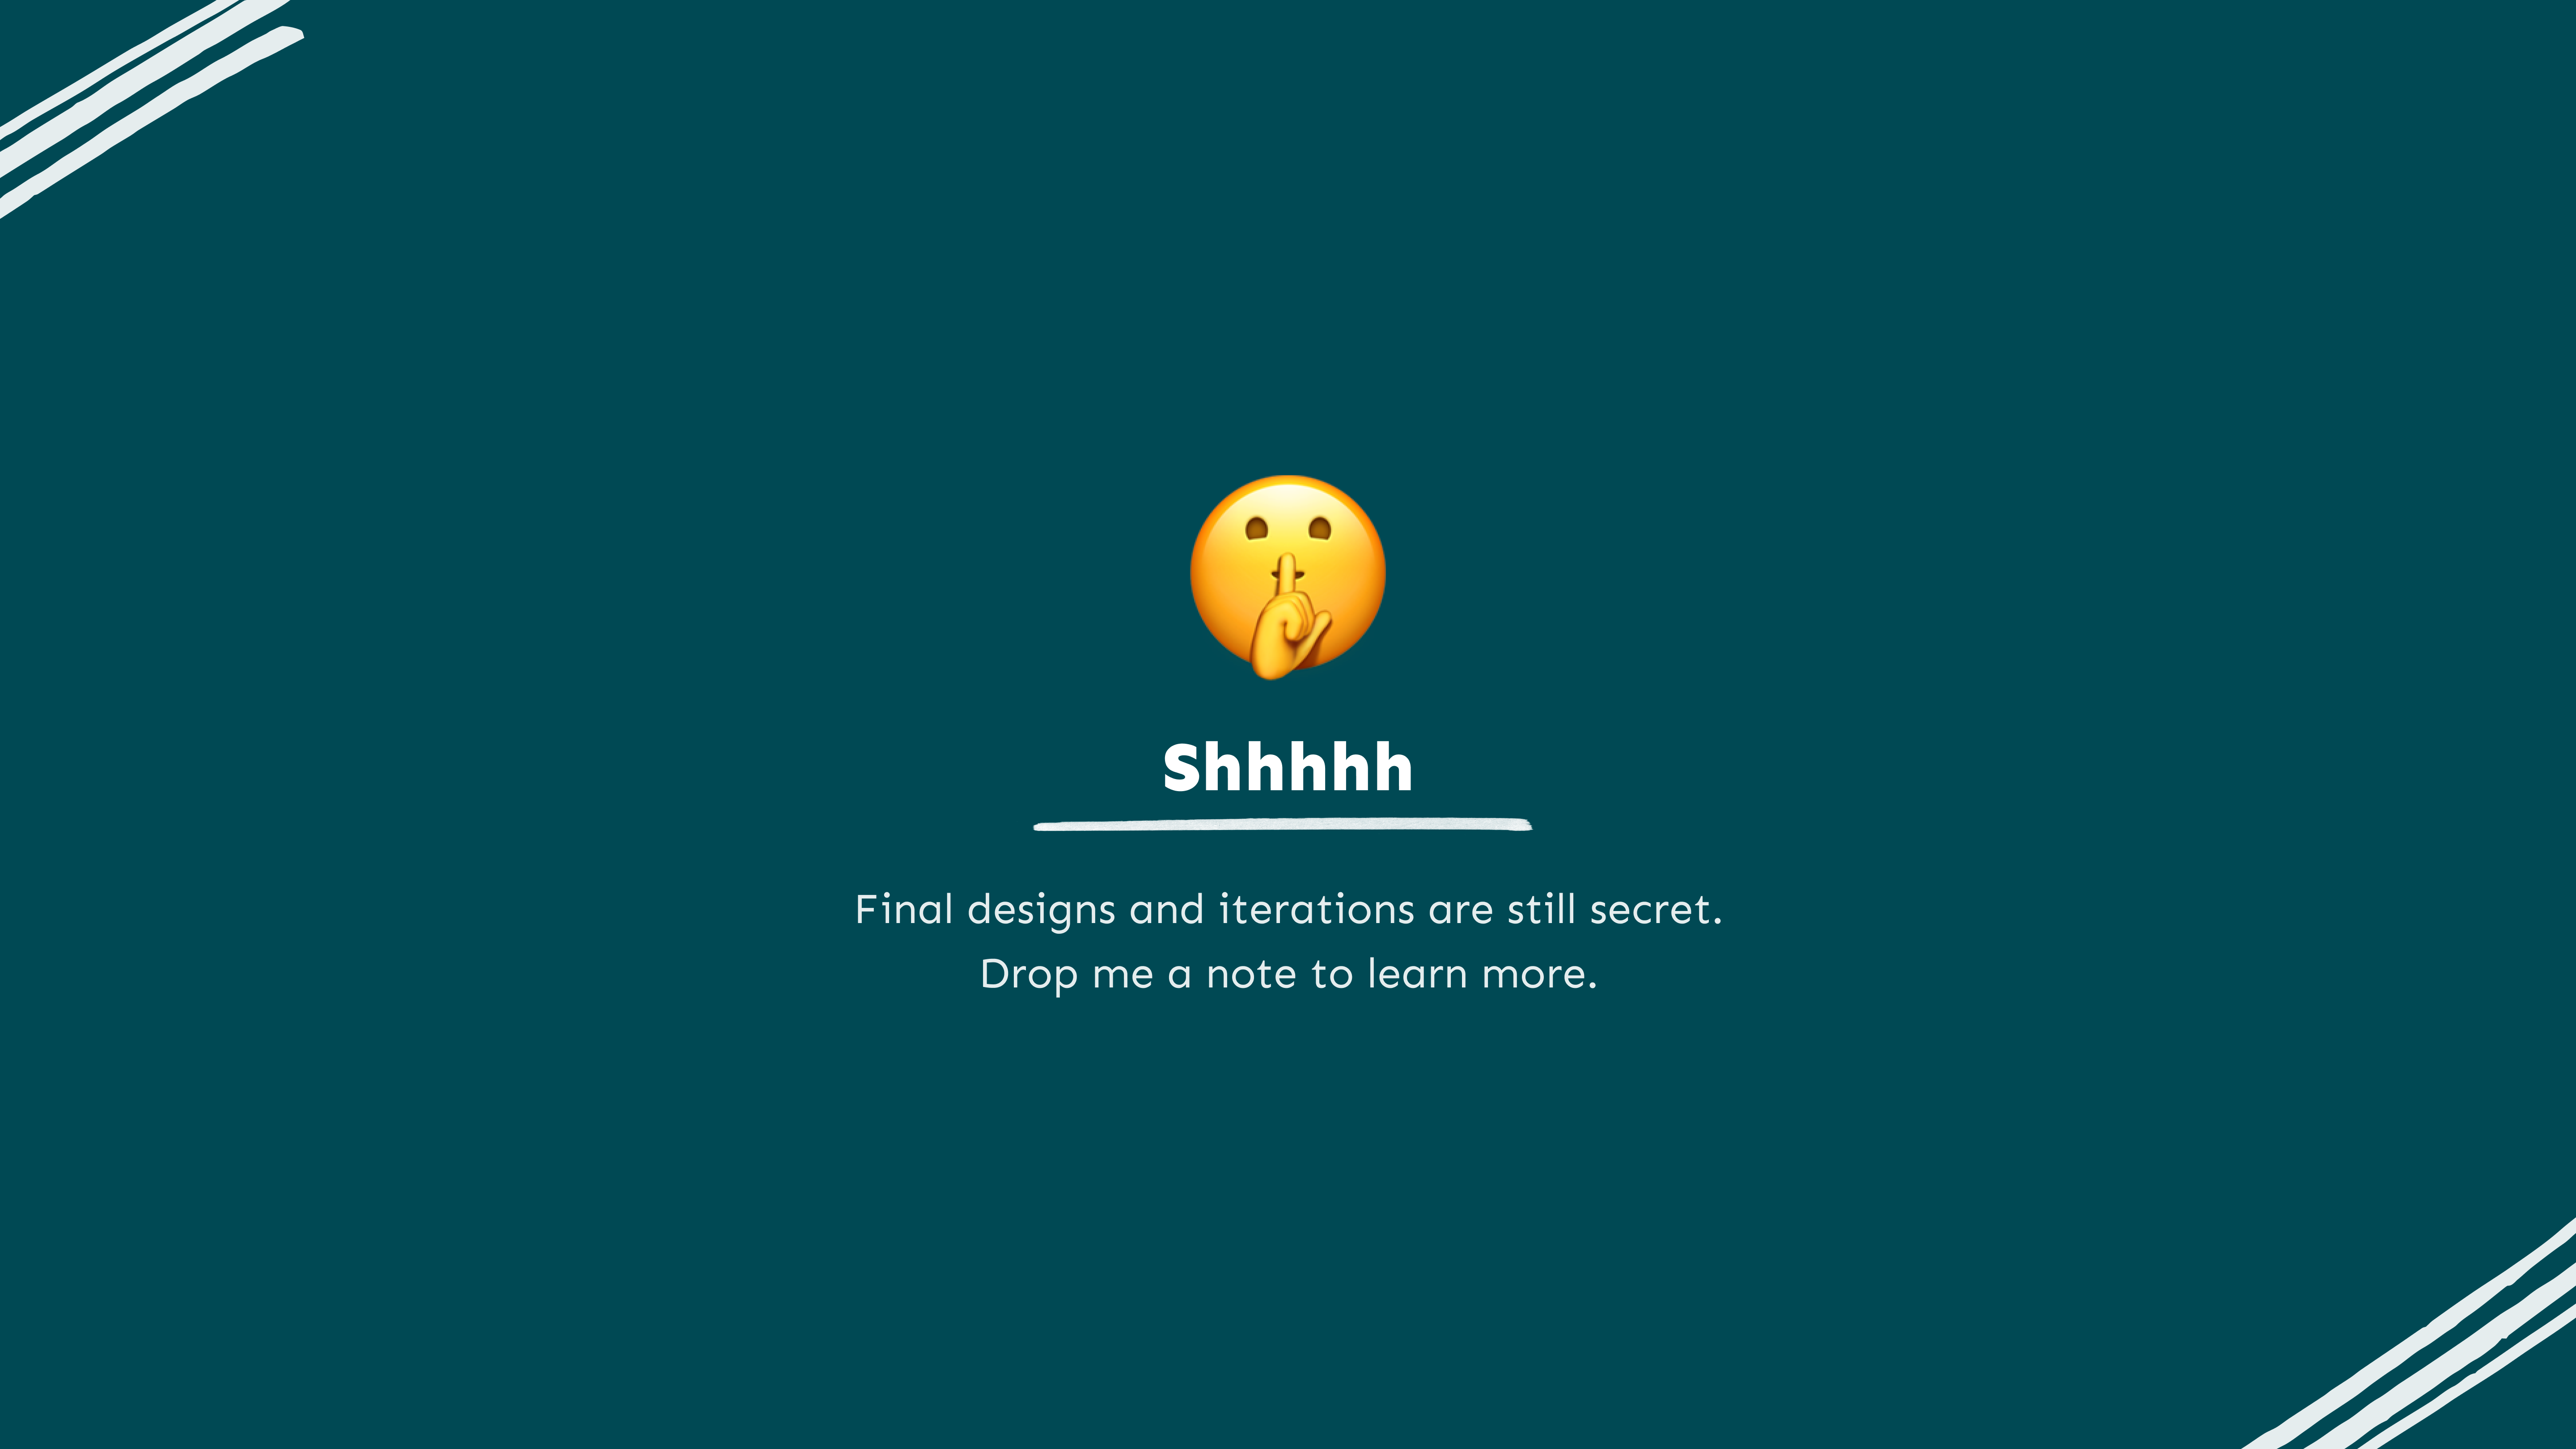 A 'shhhh' emoji explaining that 'final designs and iterations are still secret.
Drop me a note to learn more.'.